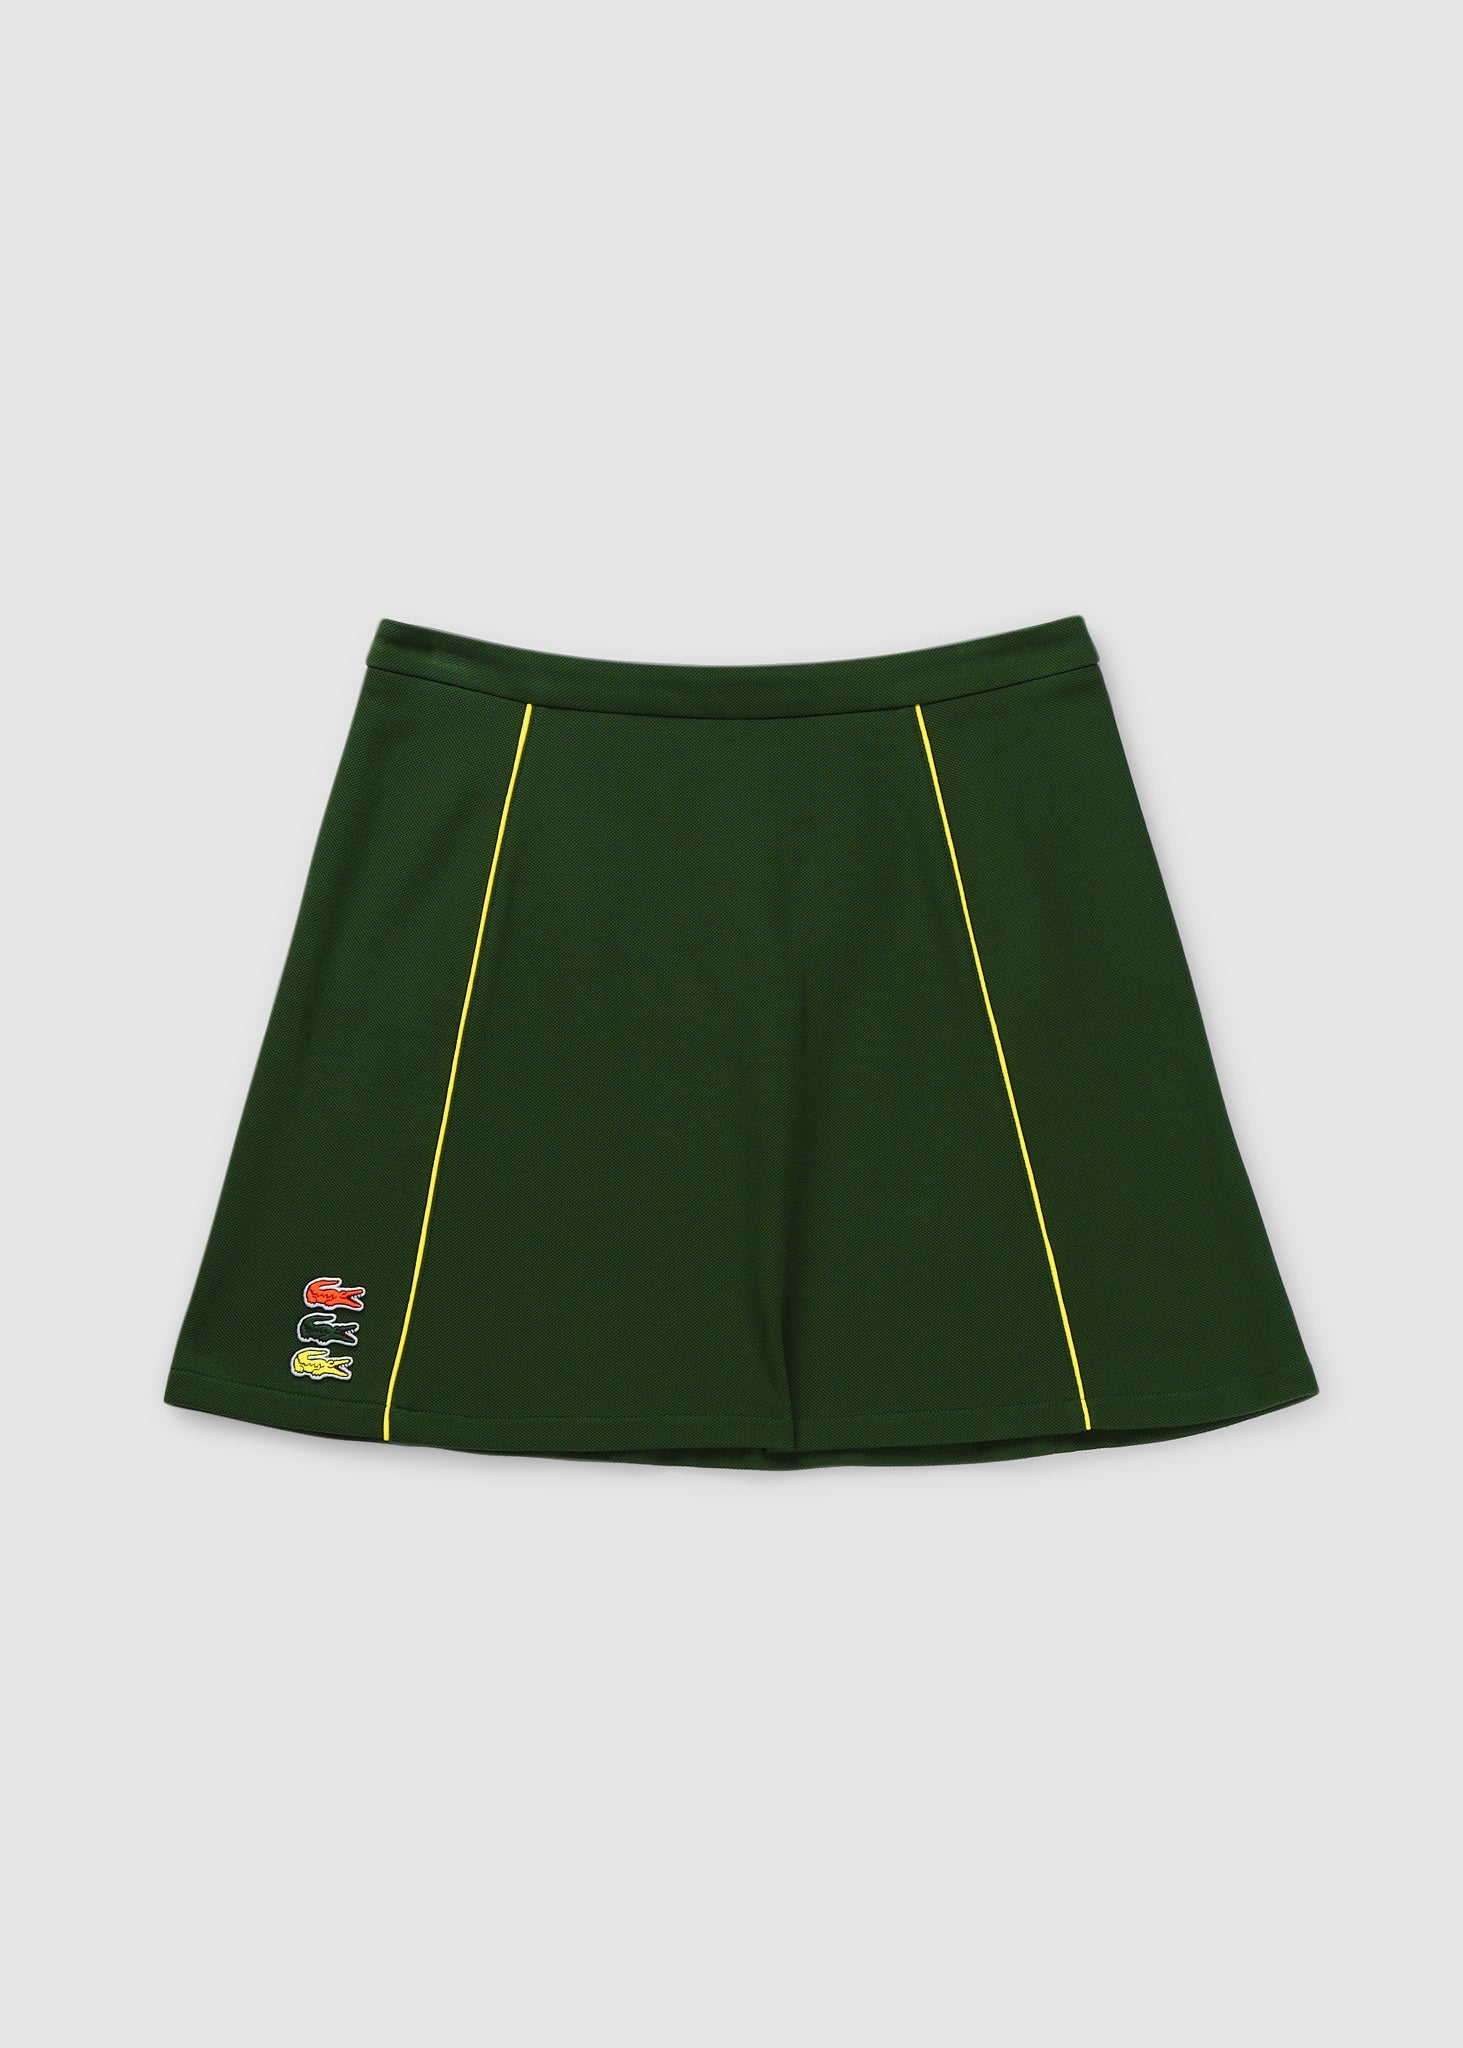 Lacoste Womens Heritage Tennis Skirt With Triple Croc In Green - Green